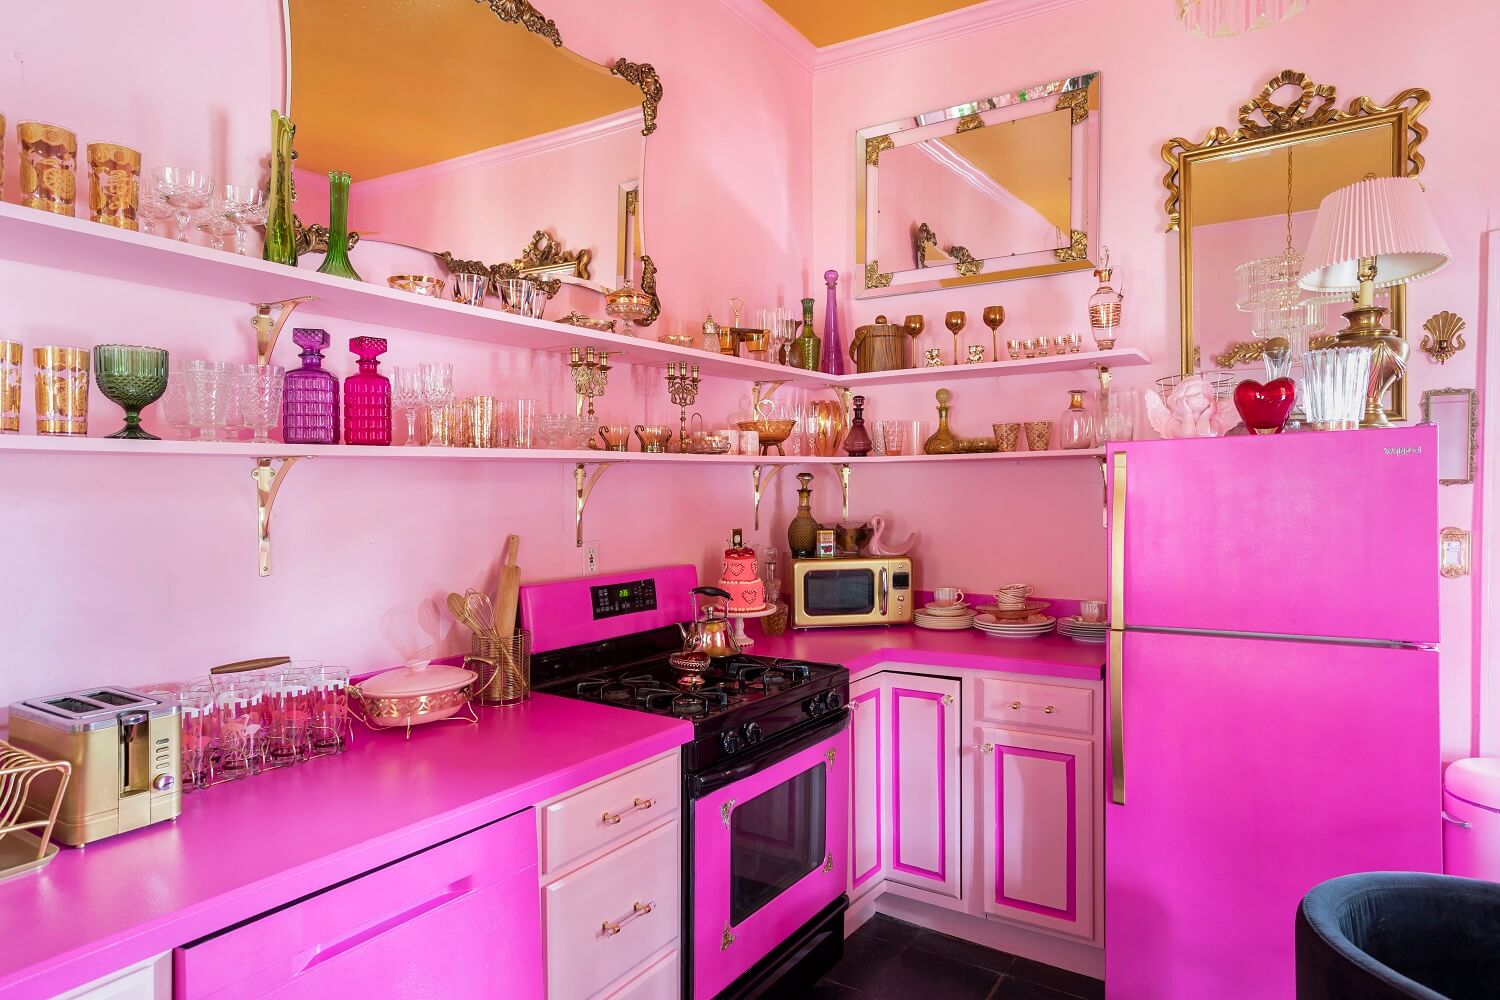 pink-painted-kitchen-cabinets-shelves-nordroom